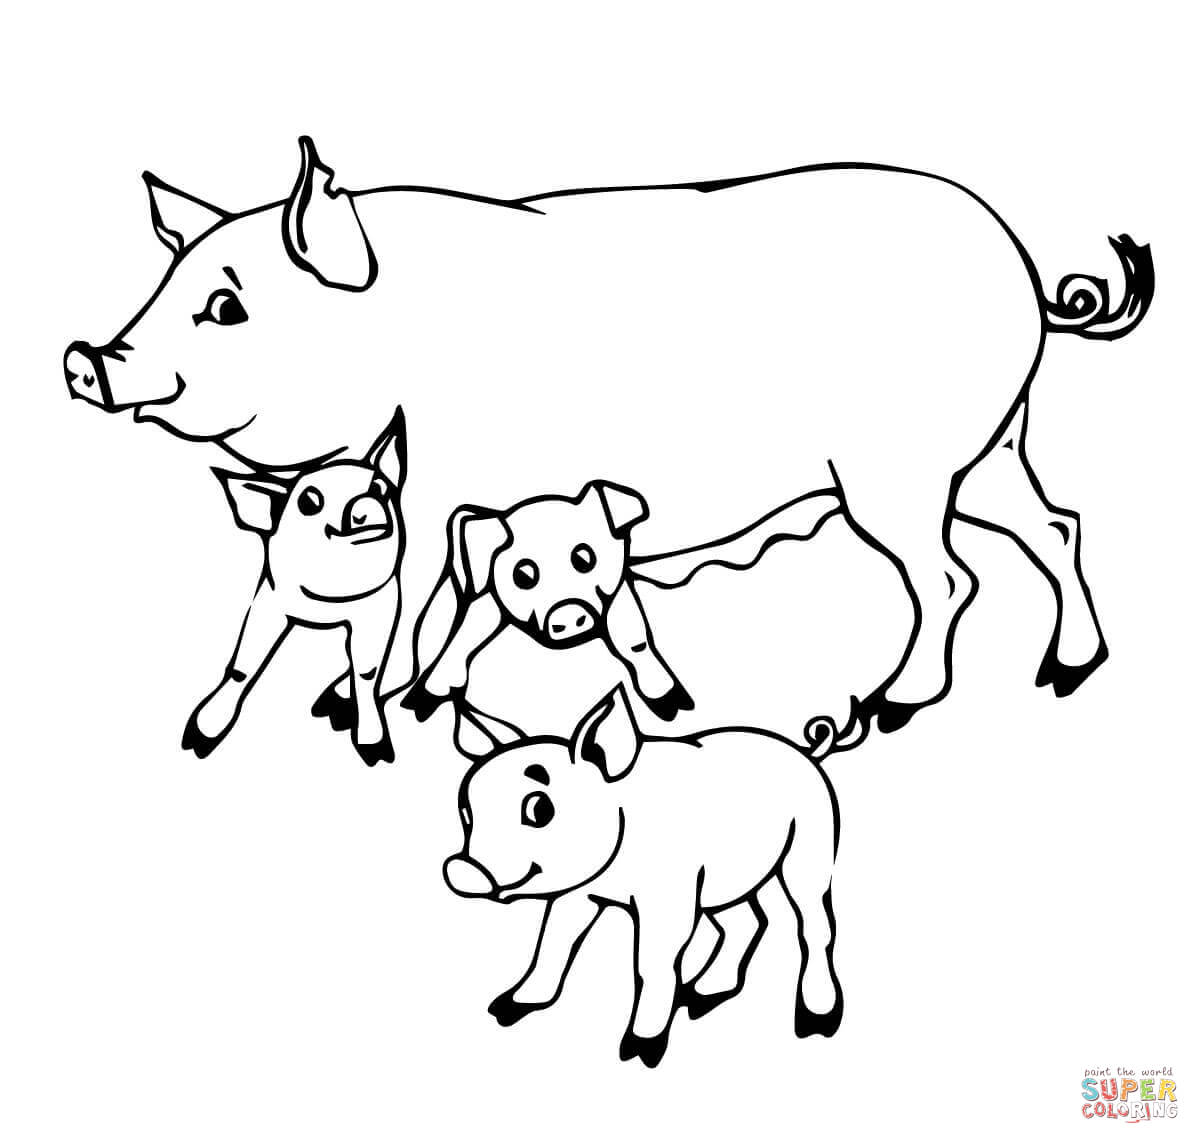 Pig Mother and Baby Pigs coloring page | Free Printable Coloring Pages